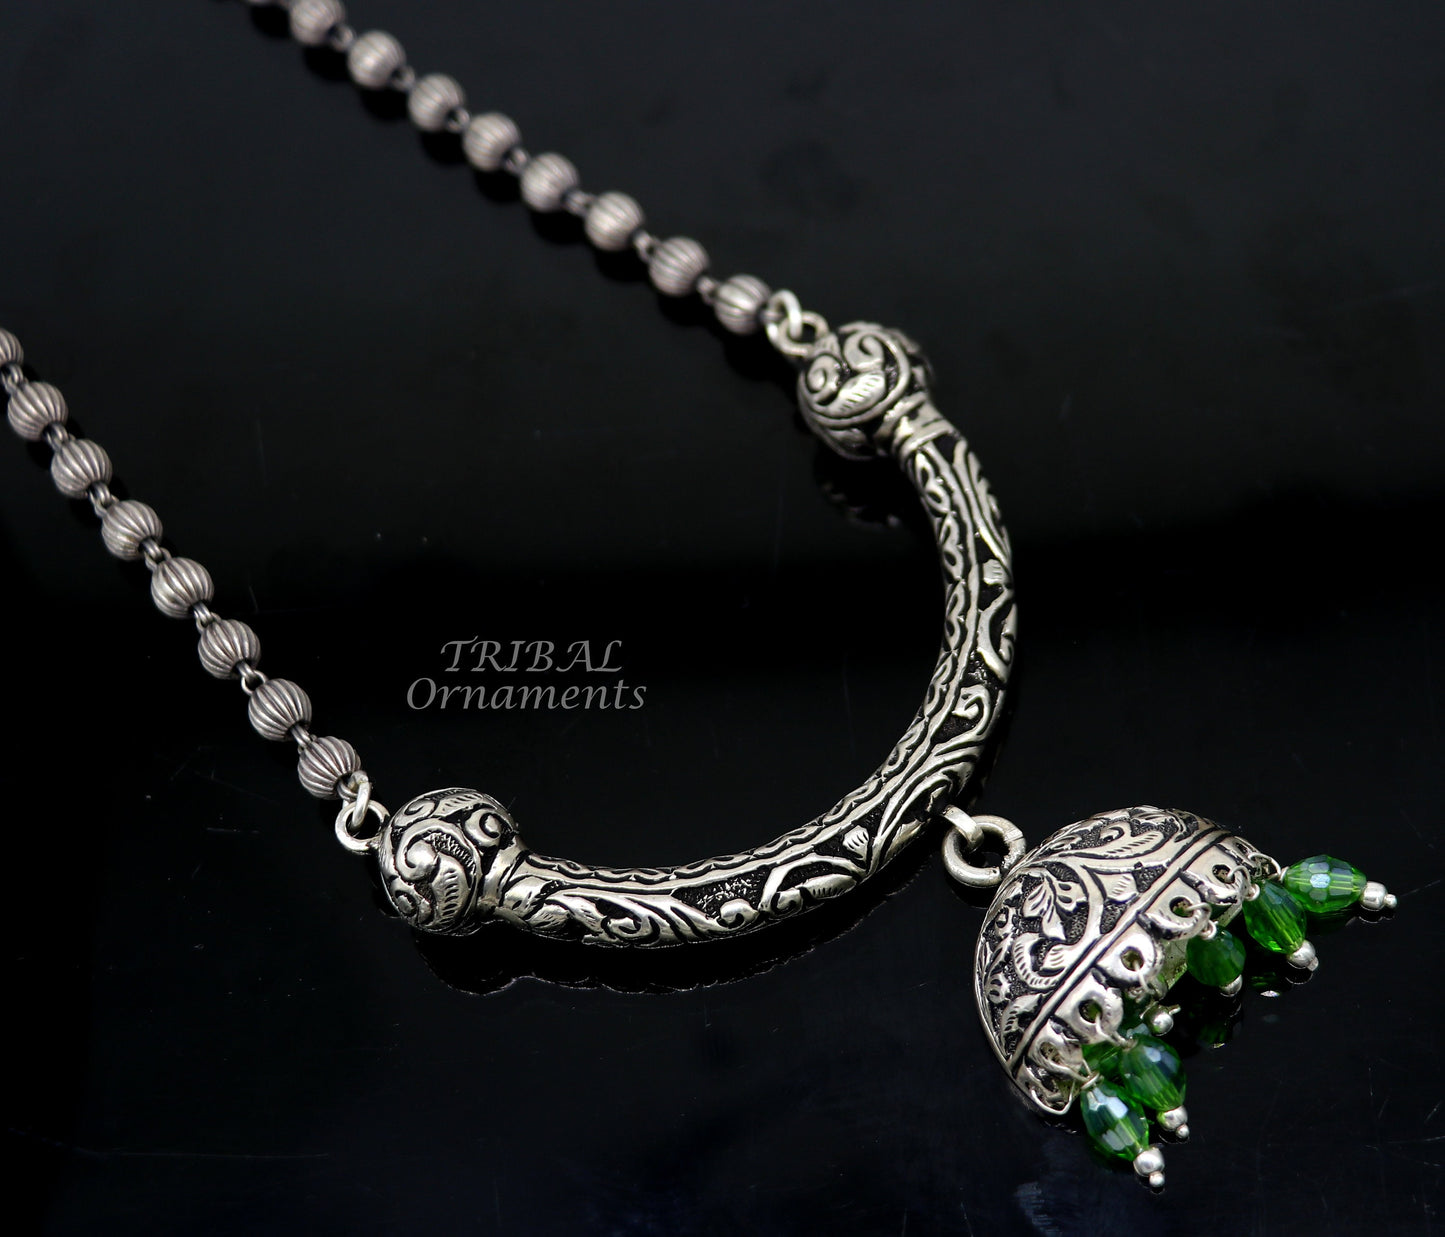 925 sterling silver handmade 5.5mm beaded long necklace with unique design traditional cultural trendy functional necklace jewelry set543 - TRIBAL ORNAMENTS